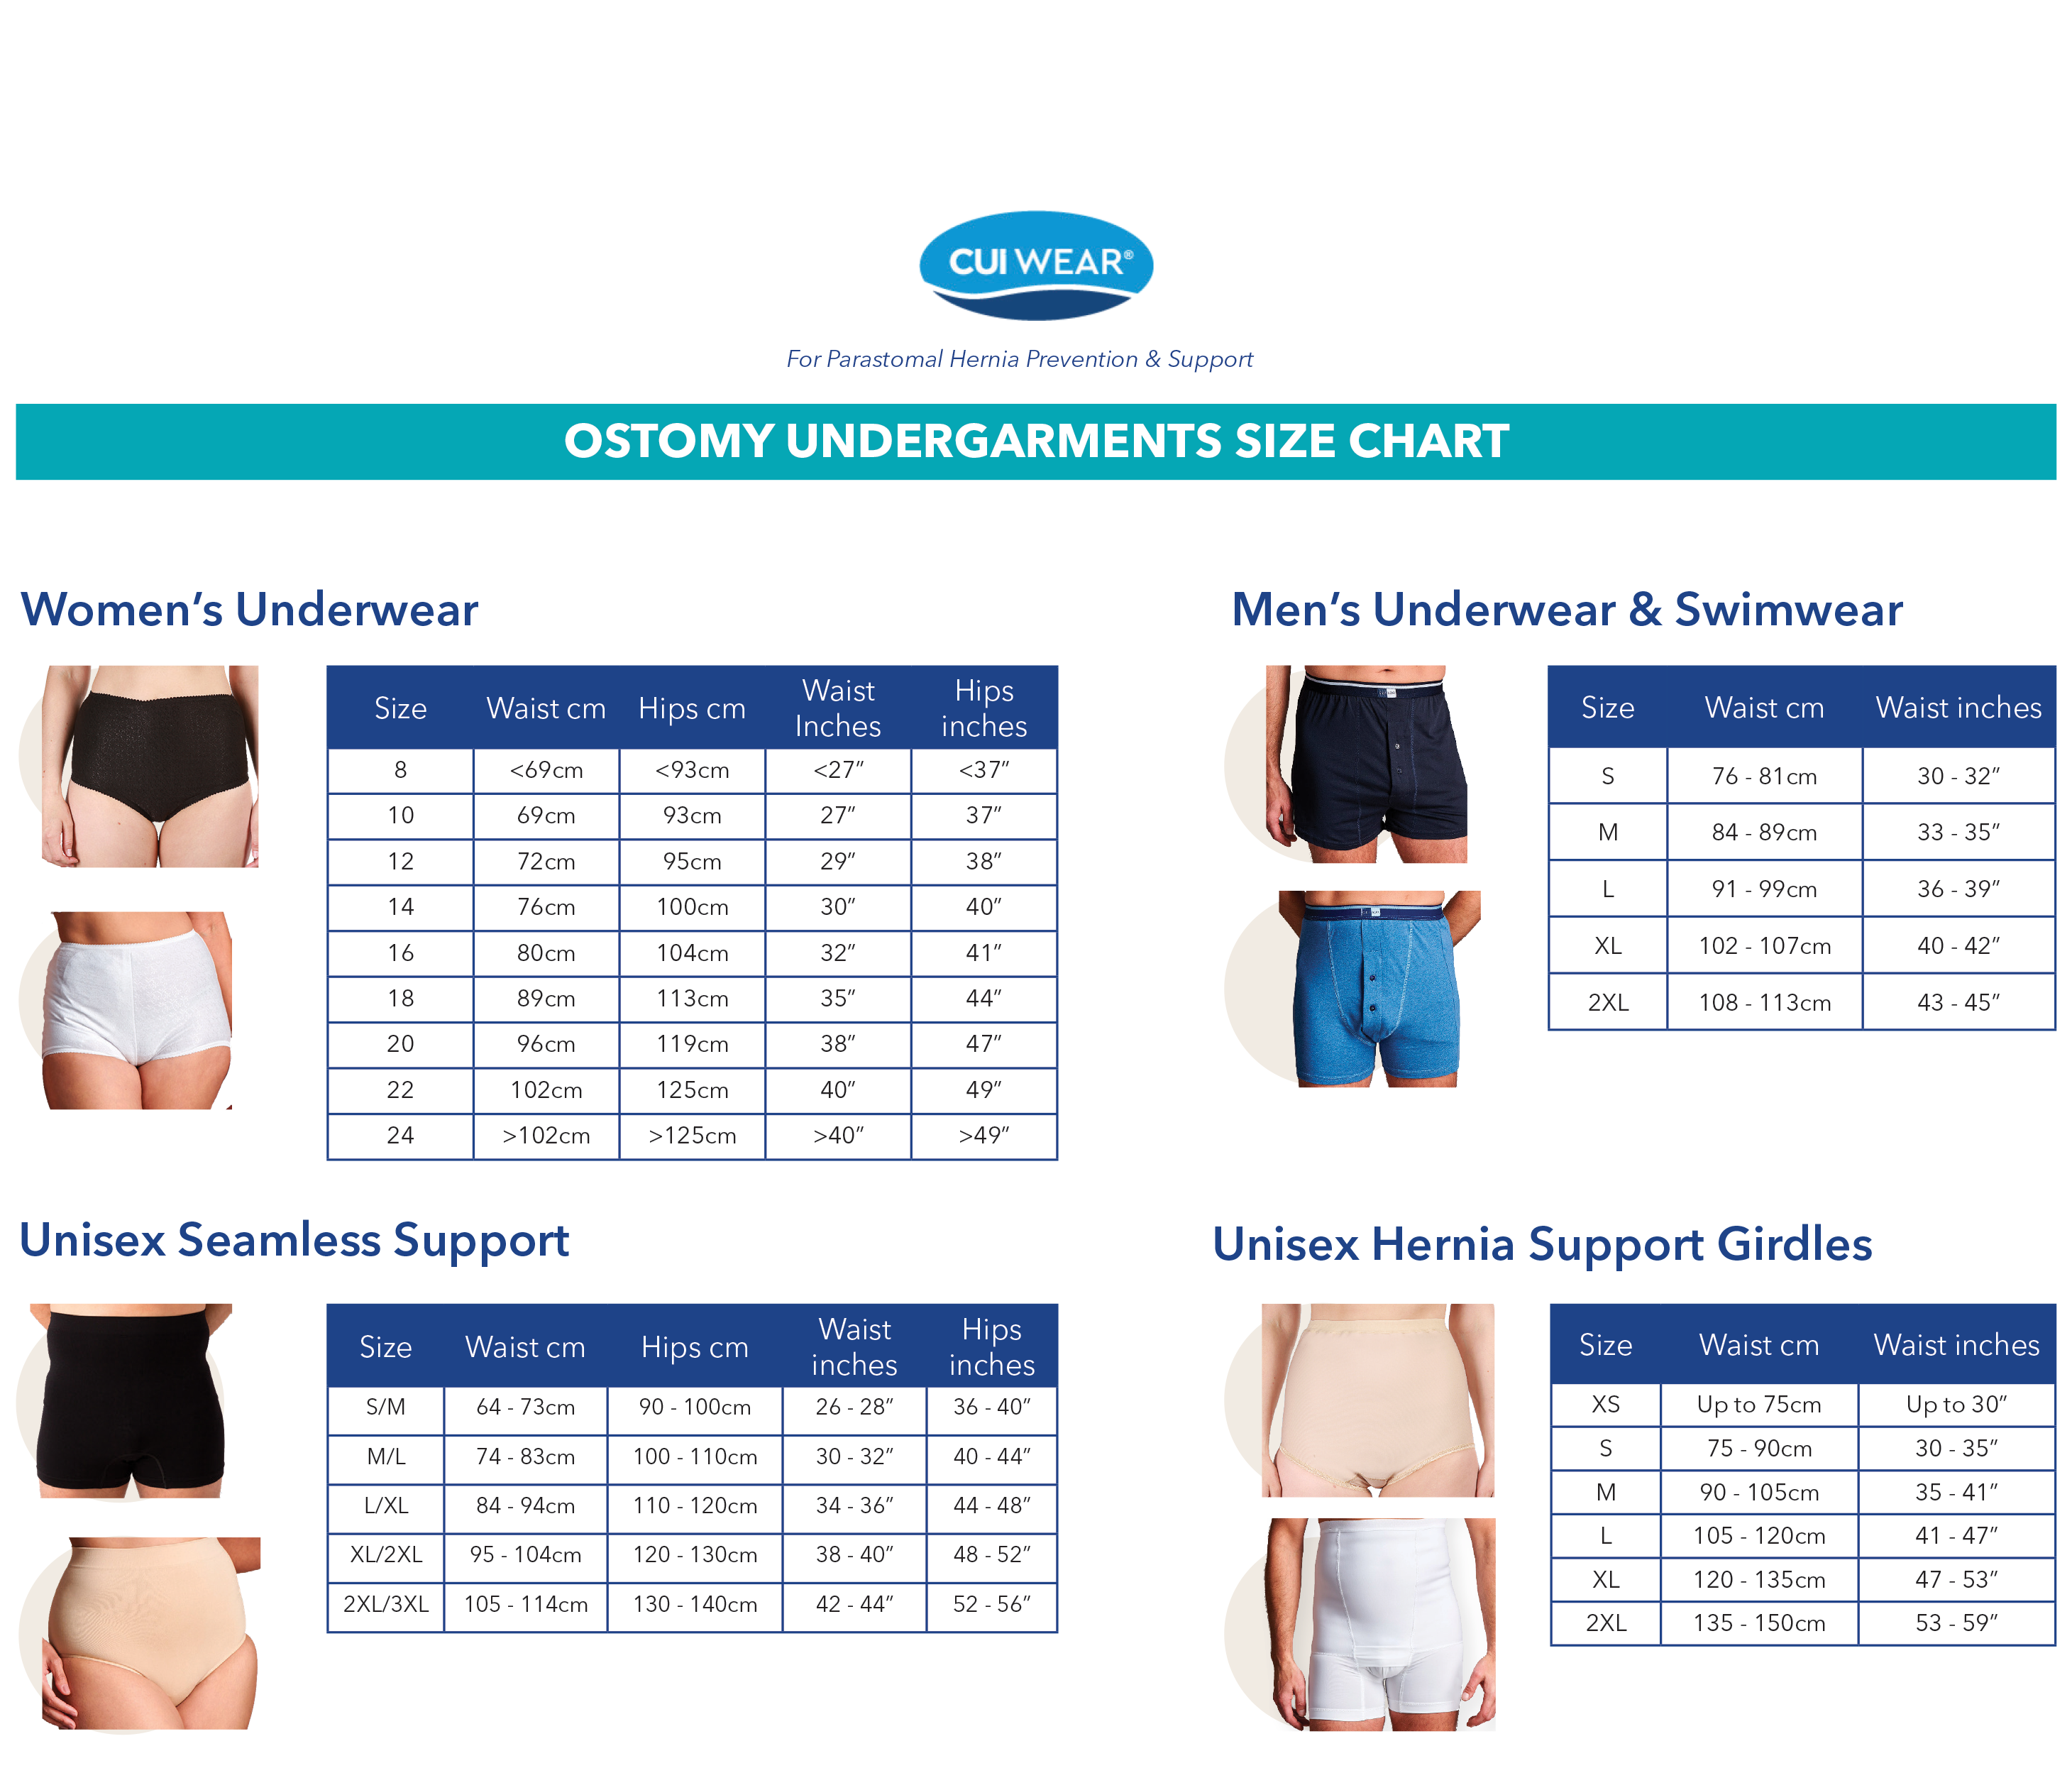 CUI Mens Hernia Low Waist Support Girdle With Legs - 1 each, SMALL, WHITE